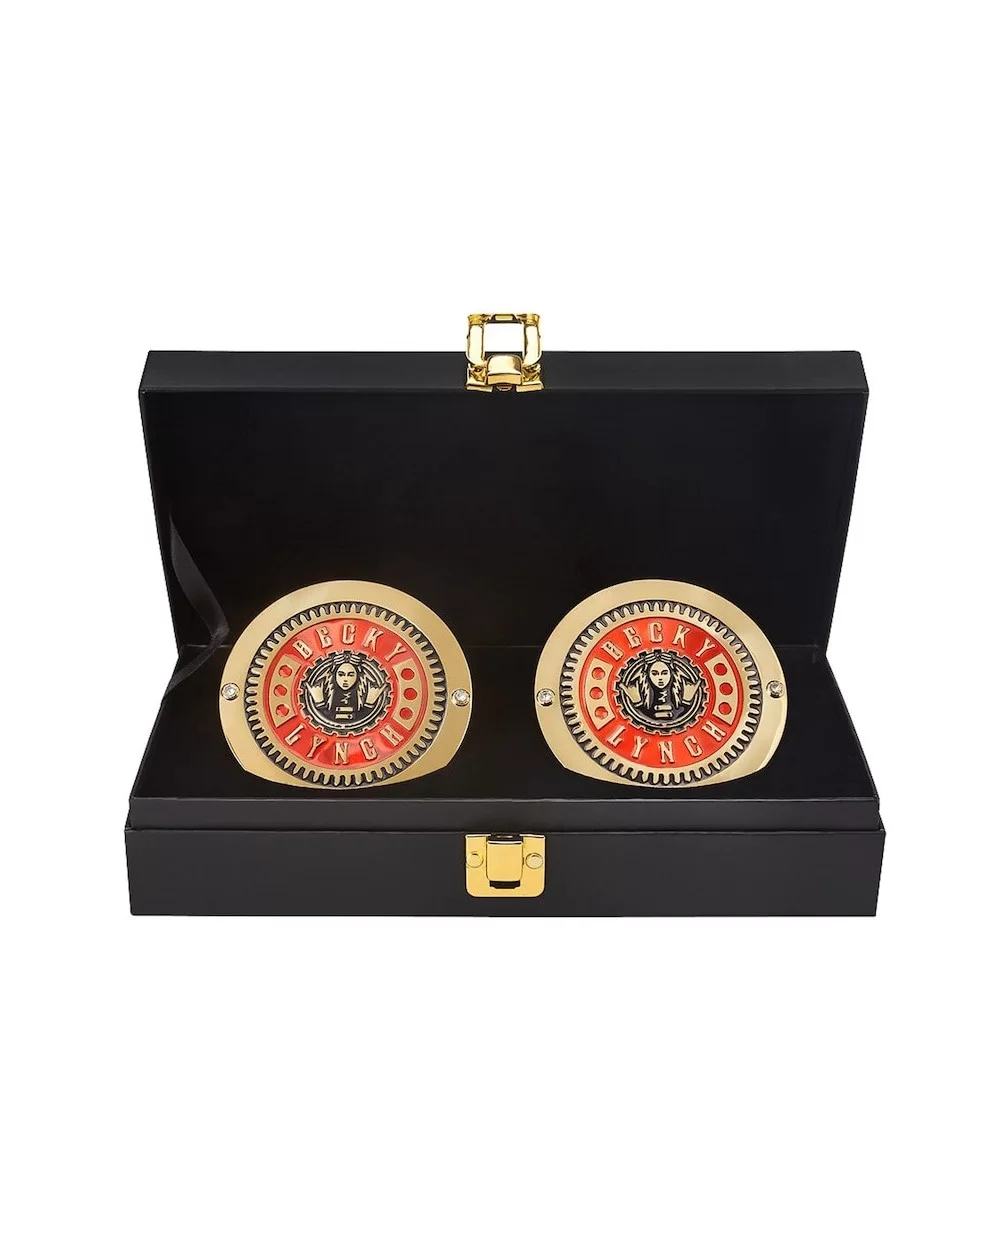 Becky Lynch Championship Replica Side Plate Box Set $33.60 Collectibles